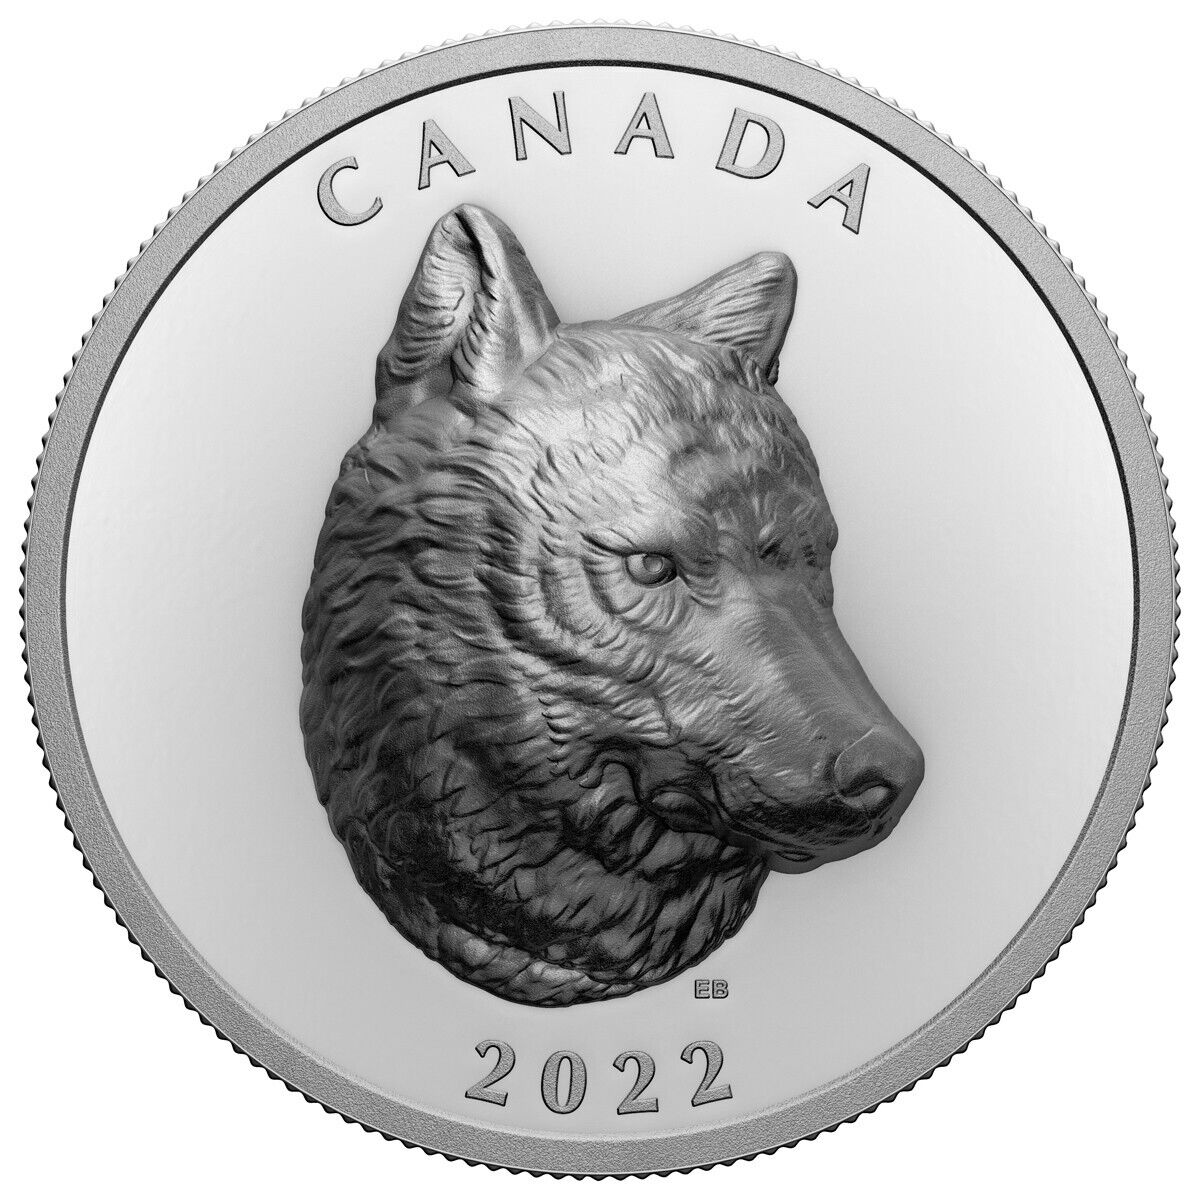 🇨🇦 Canada Extraordinarily High Relief $25 Coin, 99.99% Silver TIMBER WOLF 2022